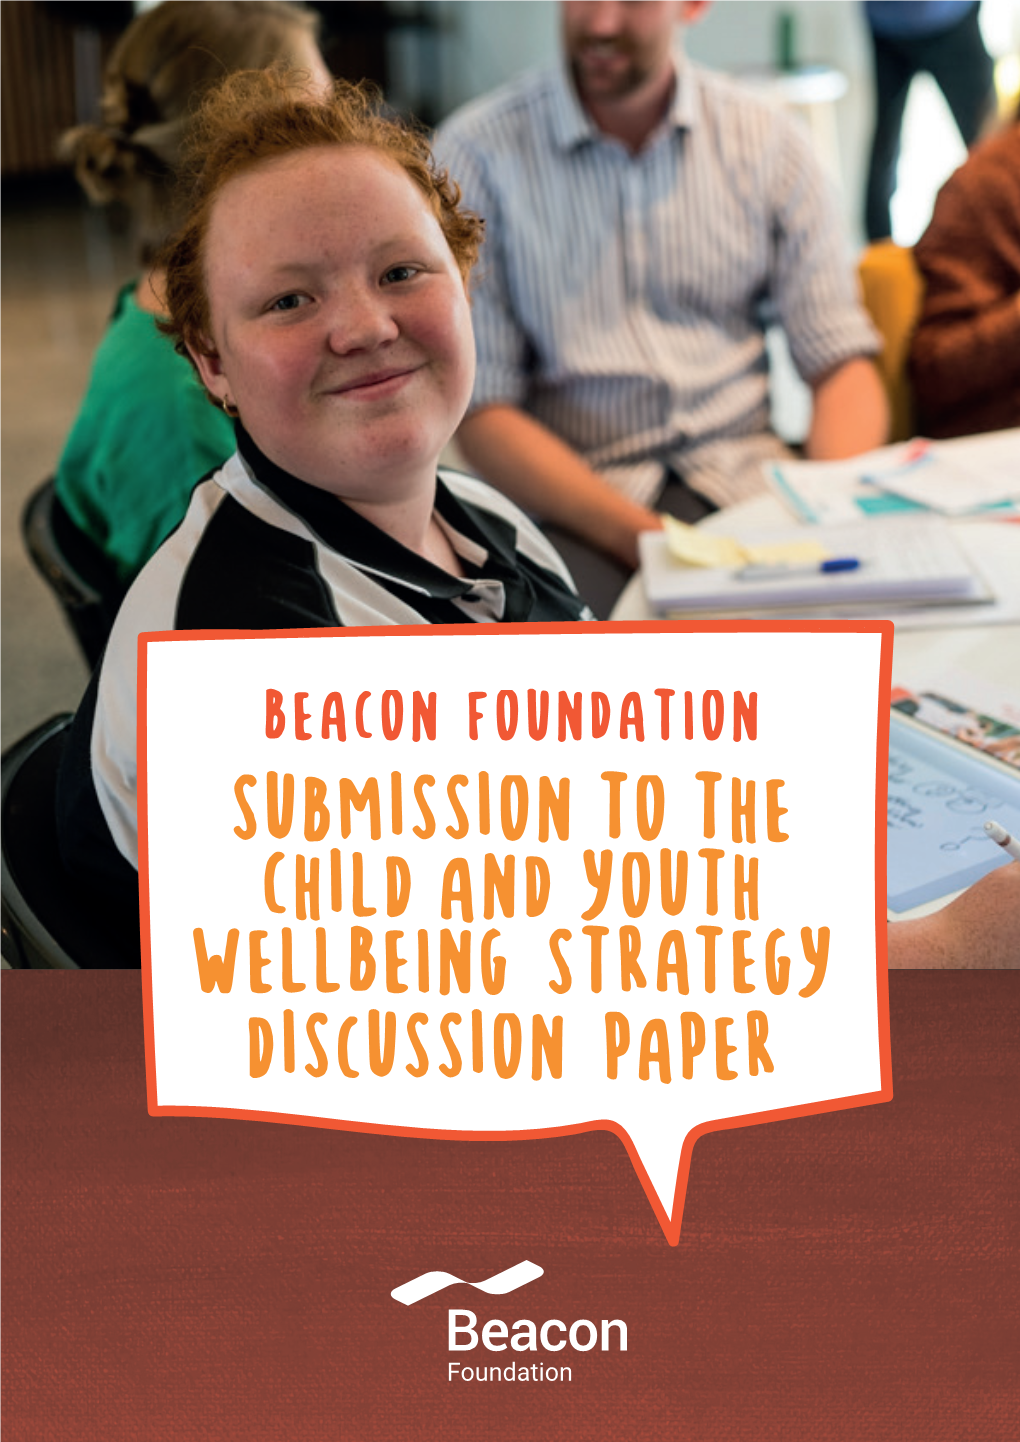 BEACON FOUNDATION Submission to the Child and Youth WELLBEING STRATEGY Discussion Paper